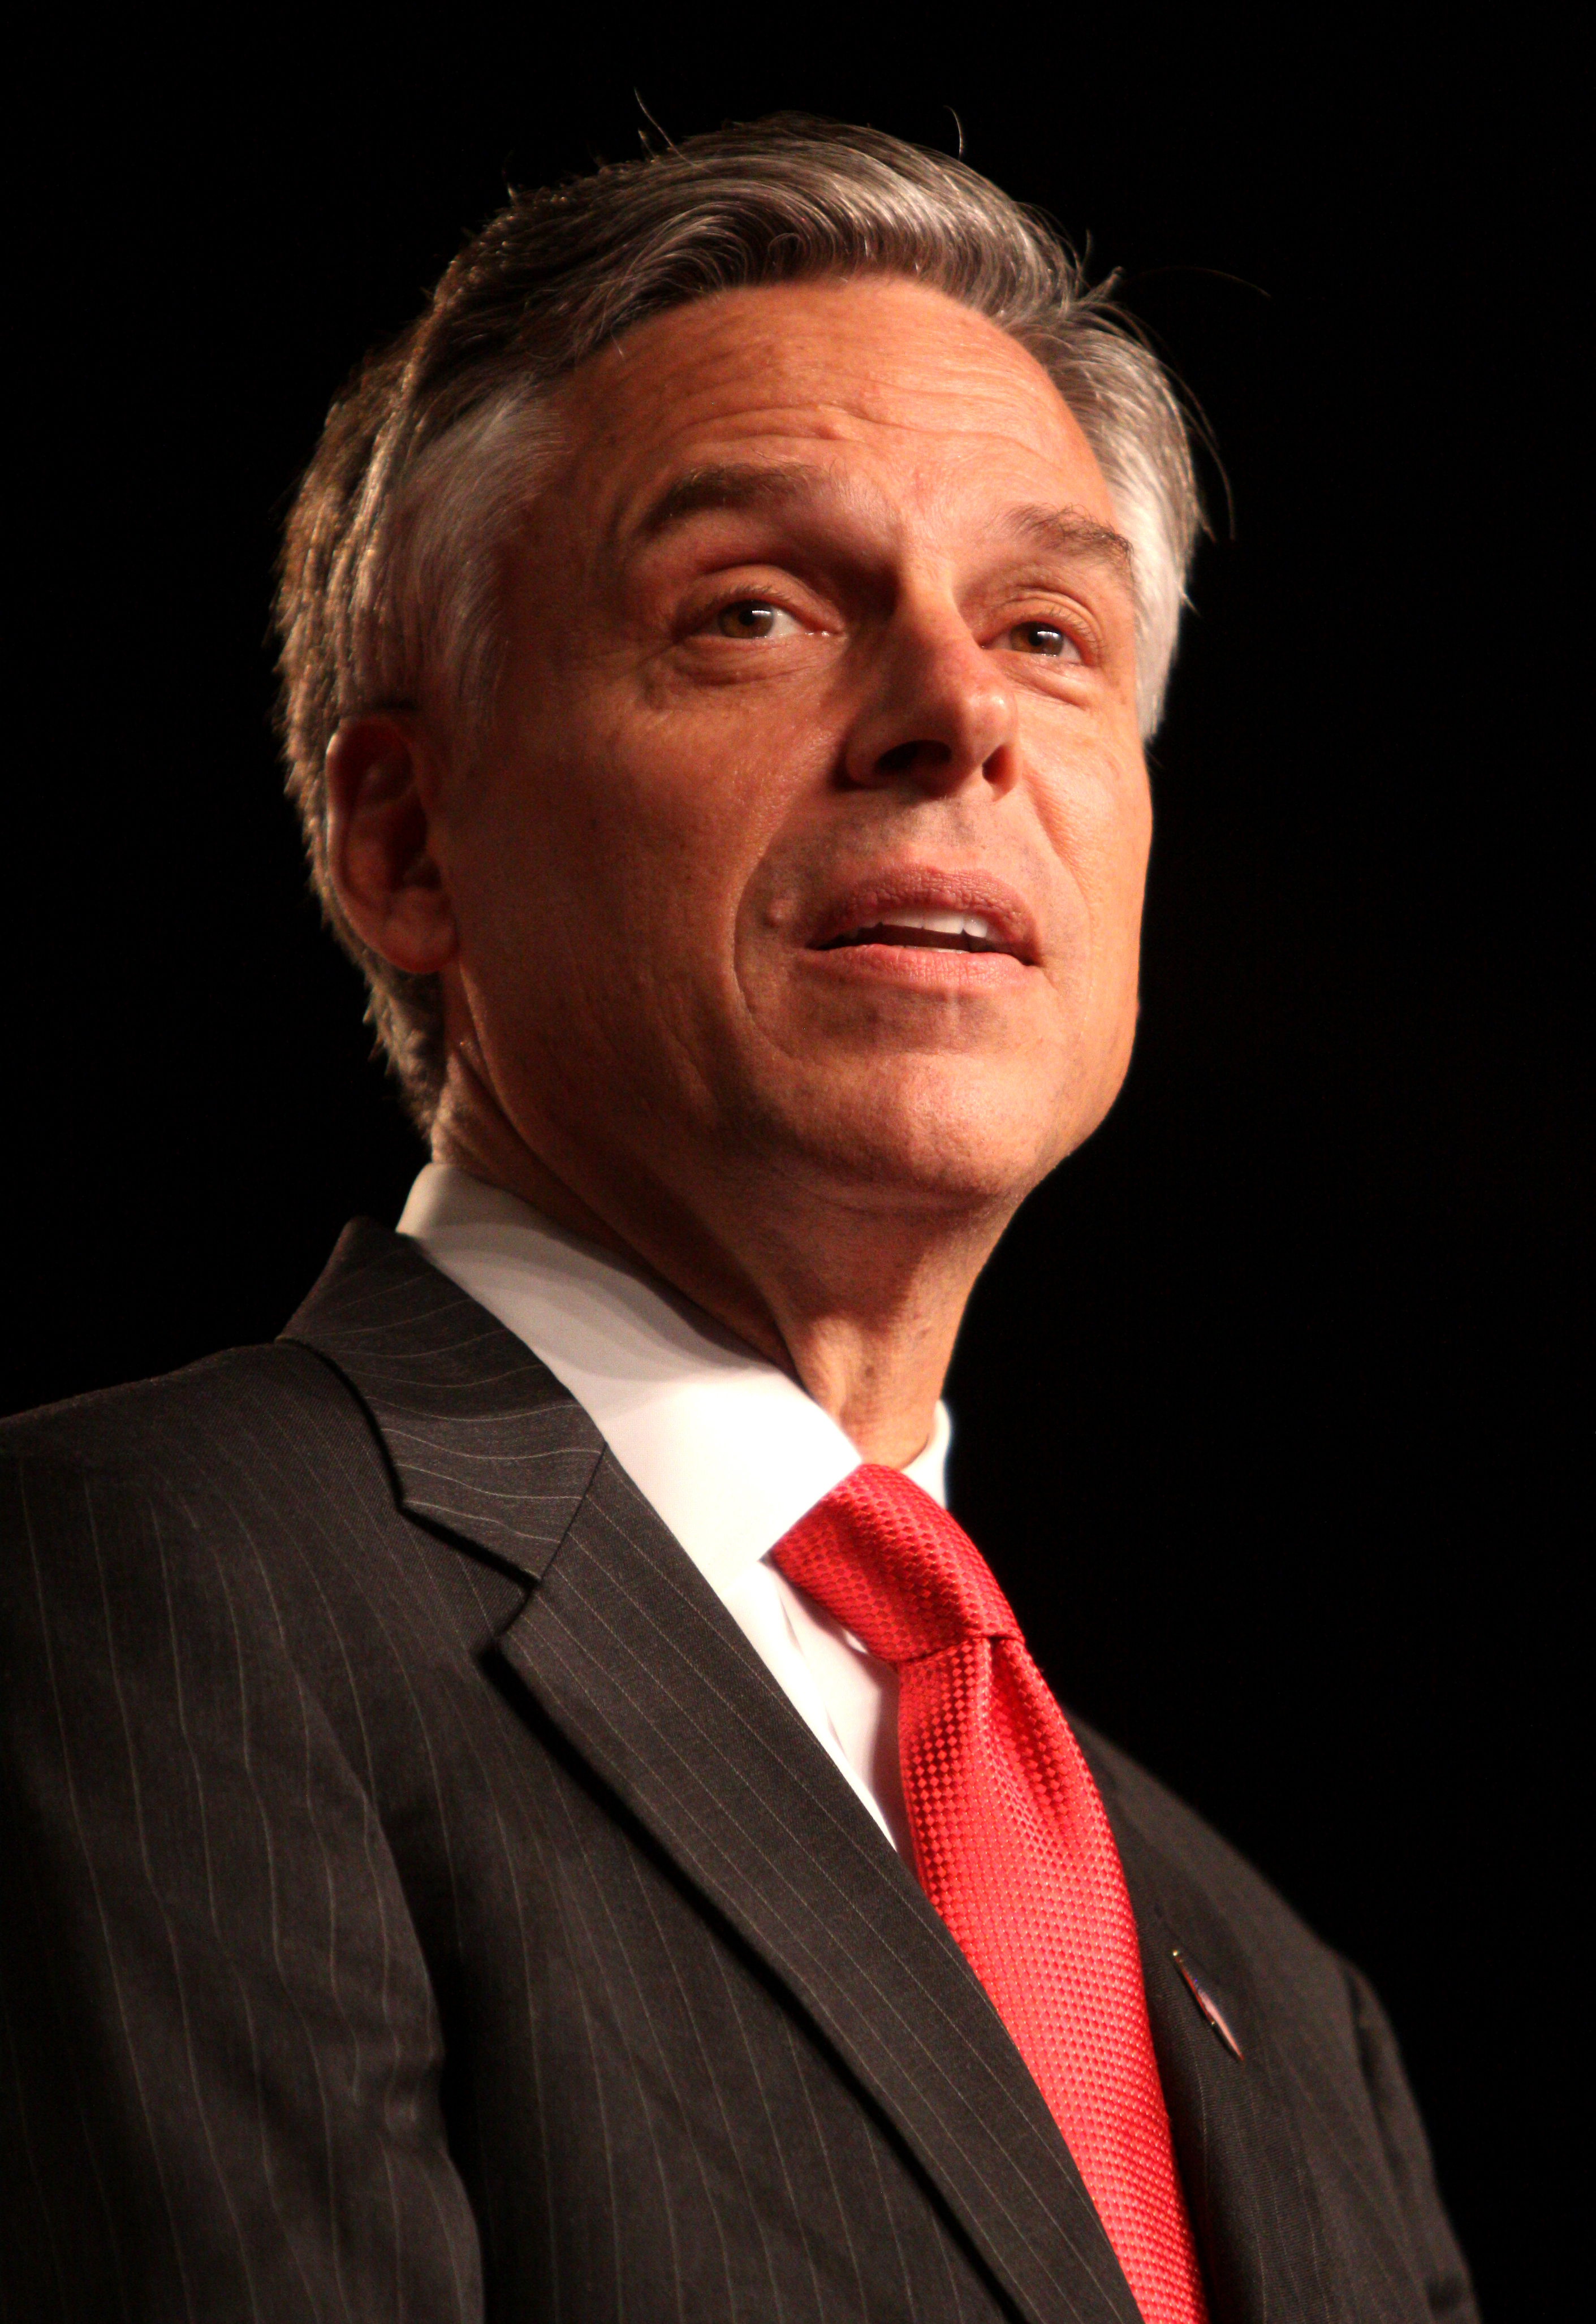 Jon Huntsman, a former governor of my home state, sure does look like an opportunist right now. After losing the battle to become the business-friendly ... - Jon_Huntsman_by_Gage_Skidmore